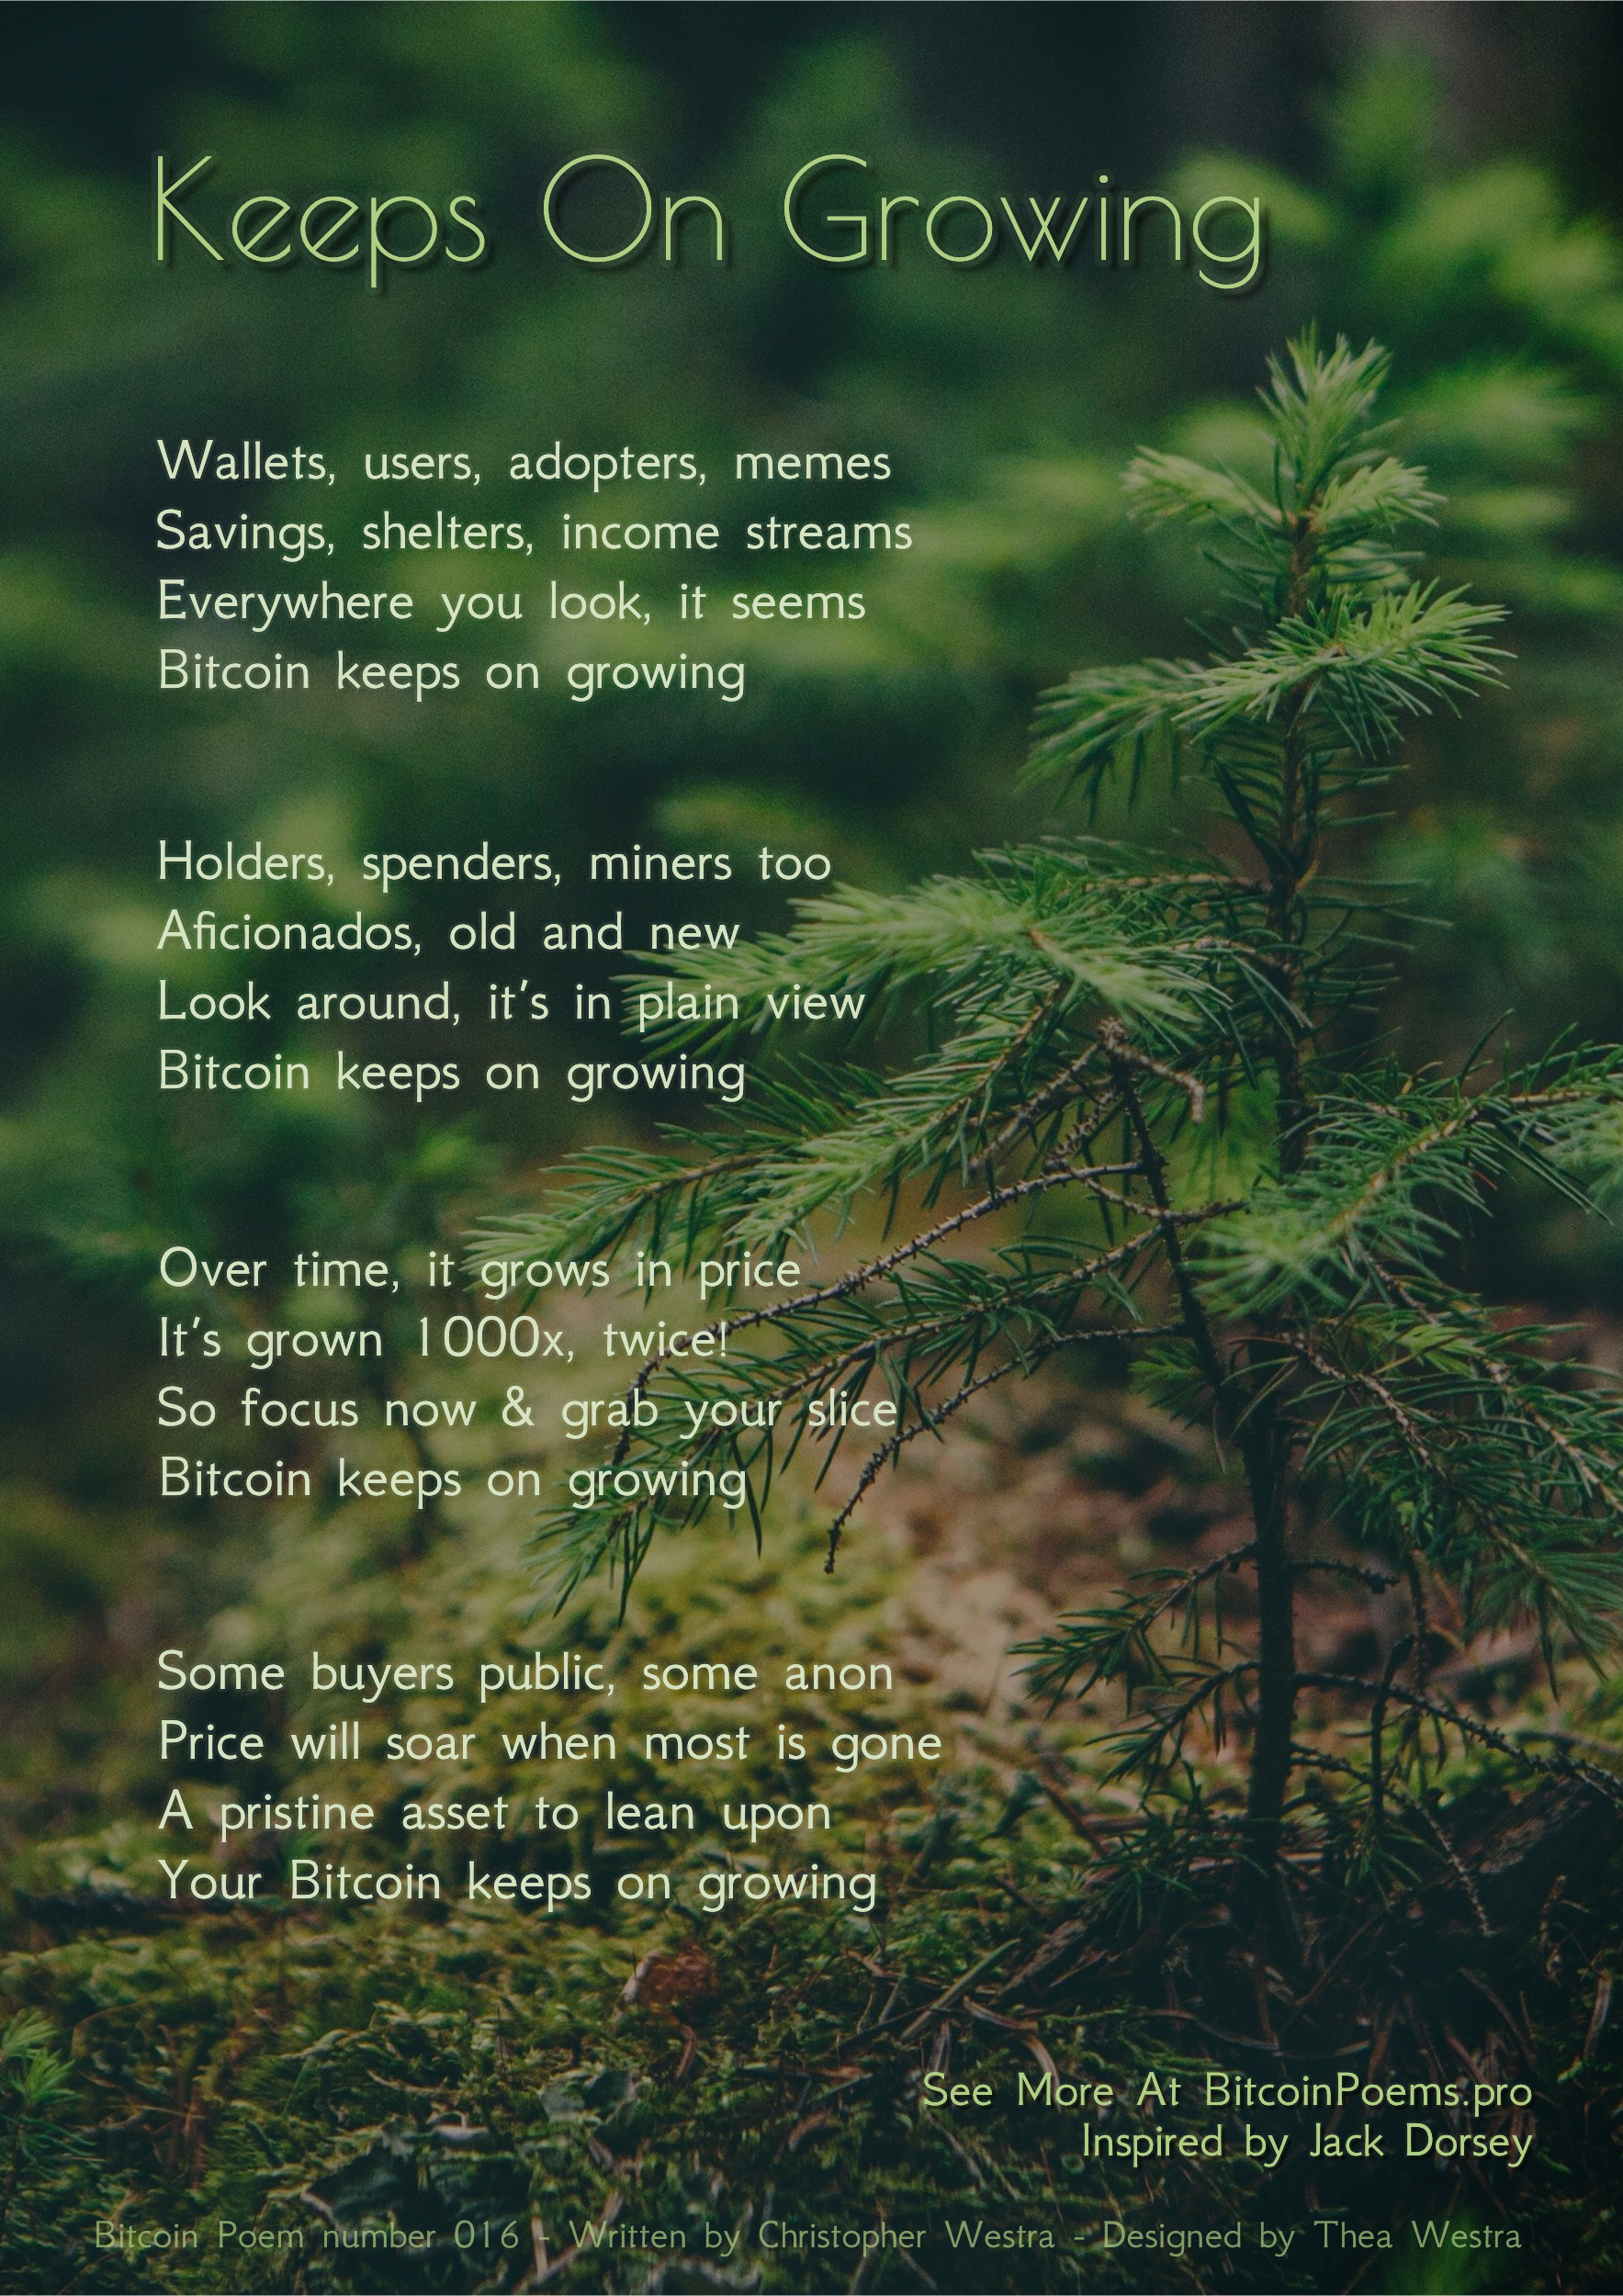 PoemName - Bitcoin Poem xxx by Christopher Westra